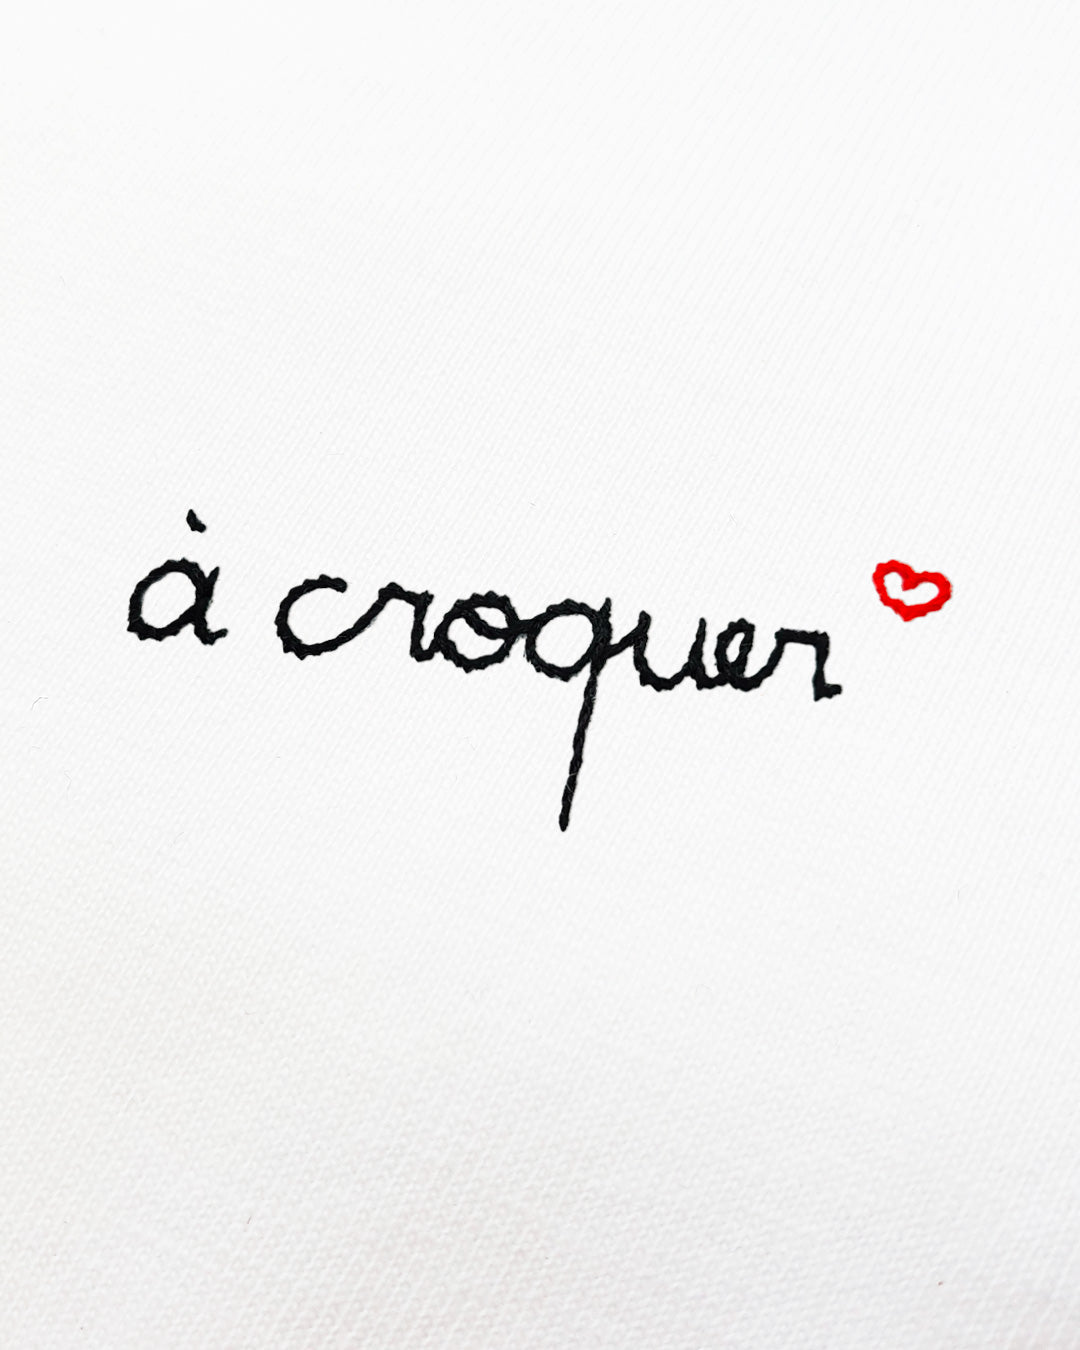 A croquer - Hand Embroidered Slogan on White T-Shirt - Irresistible